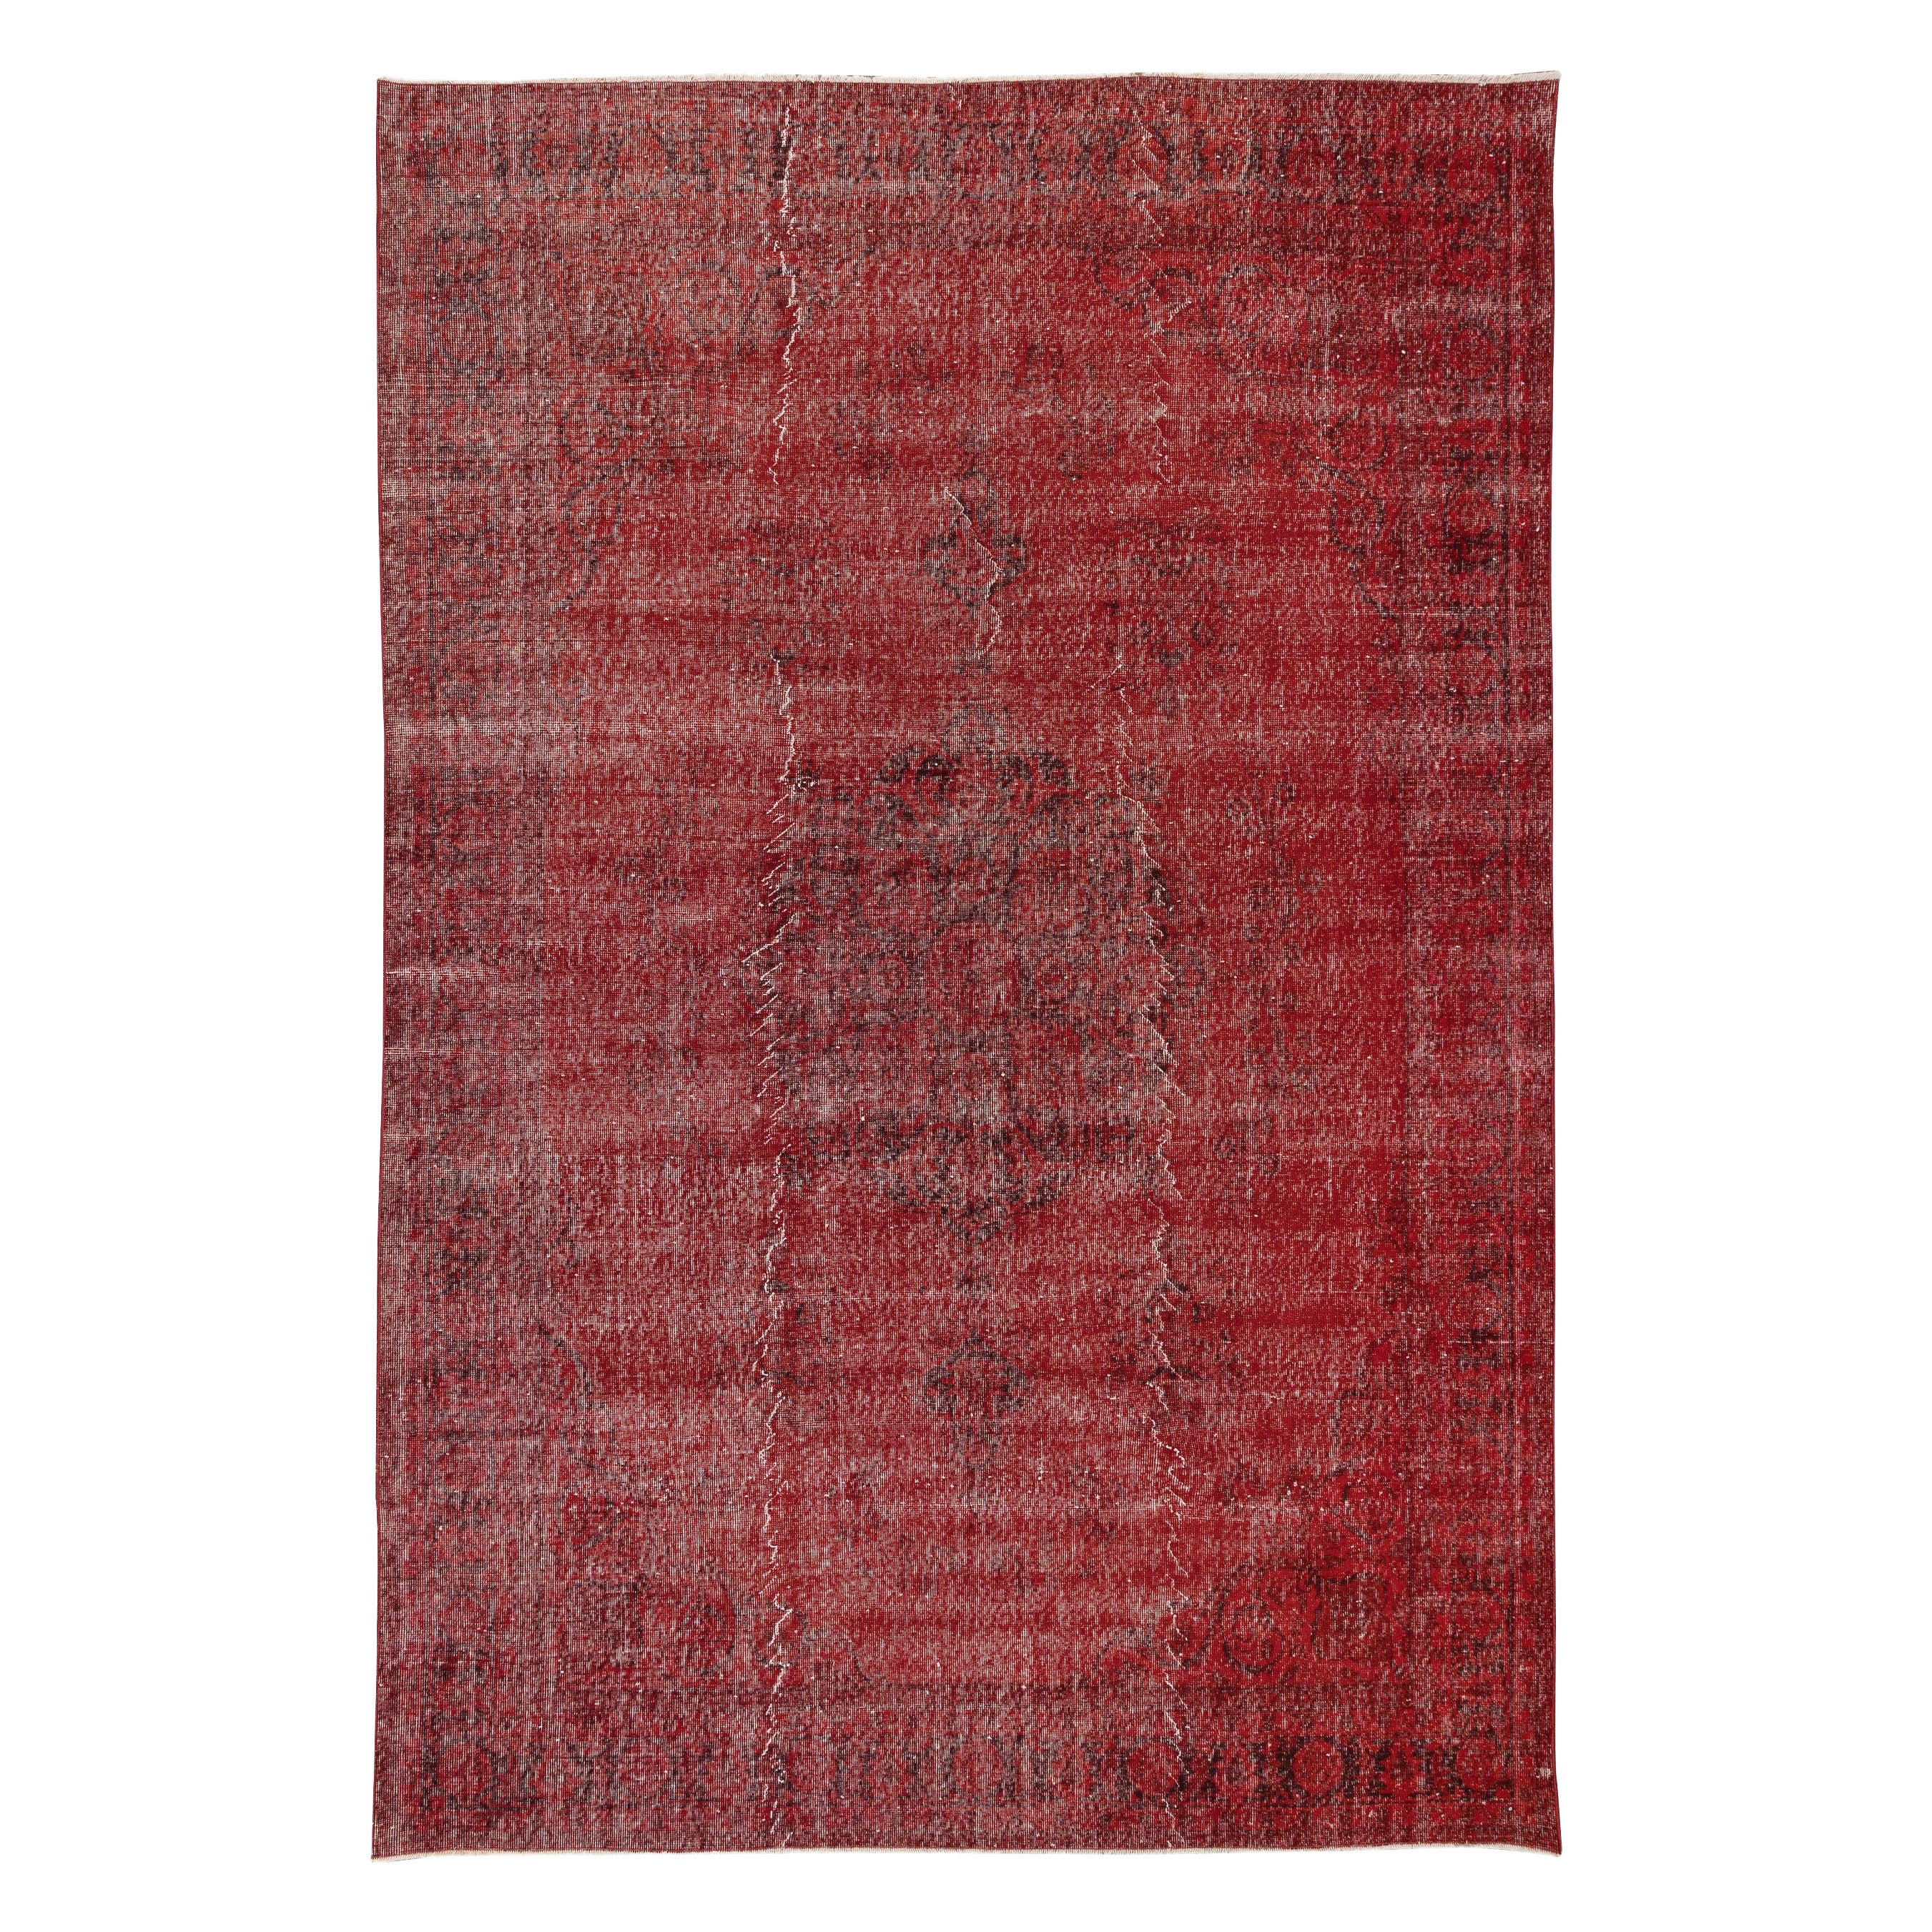 7.7x11 Ft Hand Knotted Vintage Turkish Rug Over-Dyed in Red 4 Modern Interiors For Sale